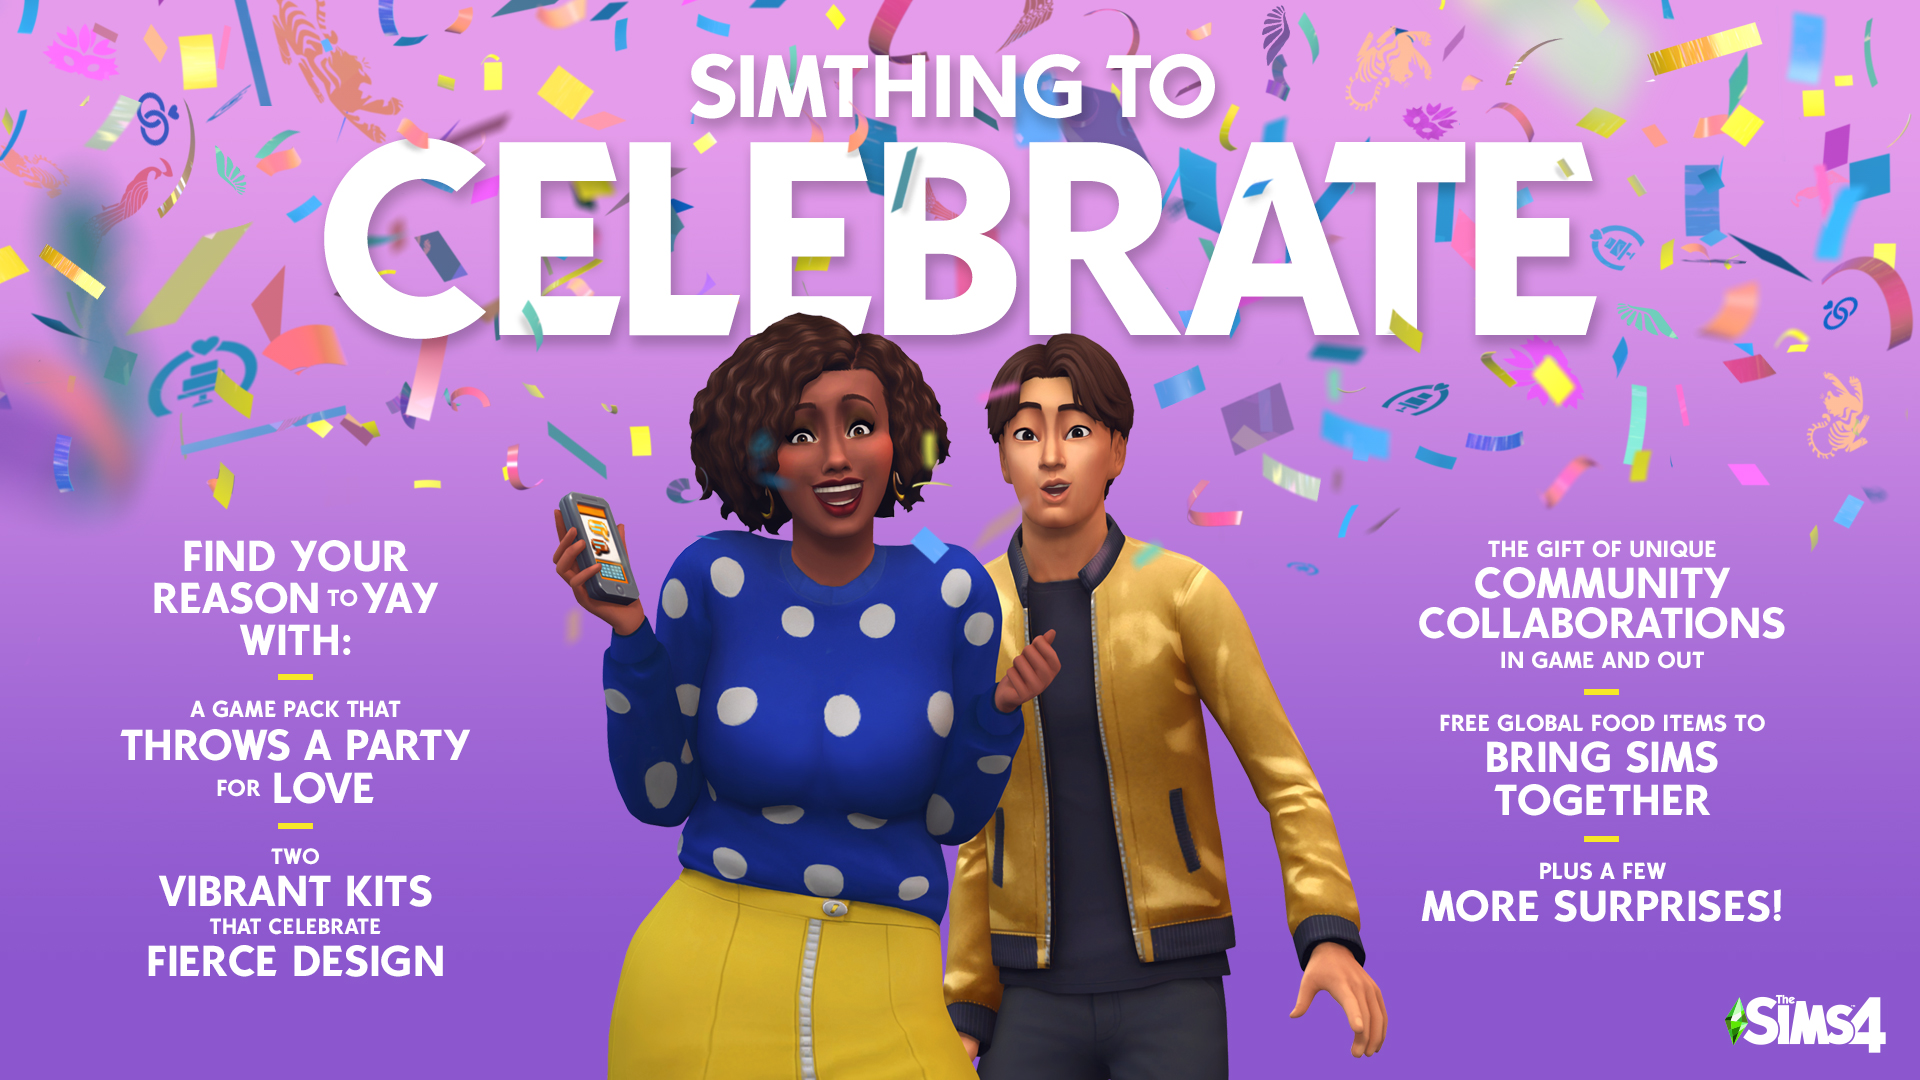 Simthing to Celebrate!Find your reason to yay with:A Game Pack that throws a party for love;Two Vibrant Kits that Celebrate Fierce Design;The gift of unique Community Collaborations in Game and Out;Free Global Food Items to Bring Sims Together;More surprises coming soon!